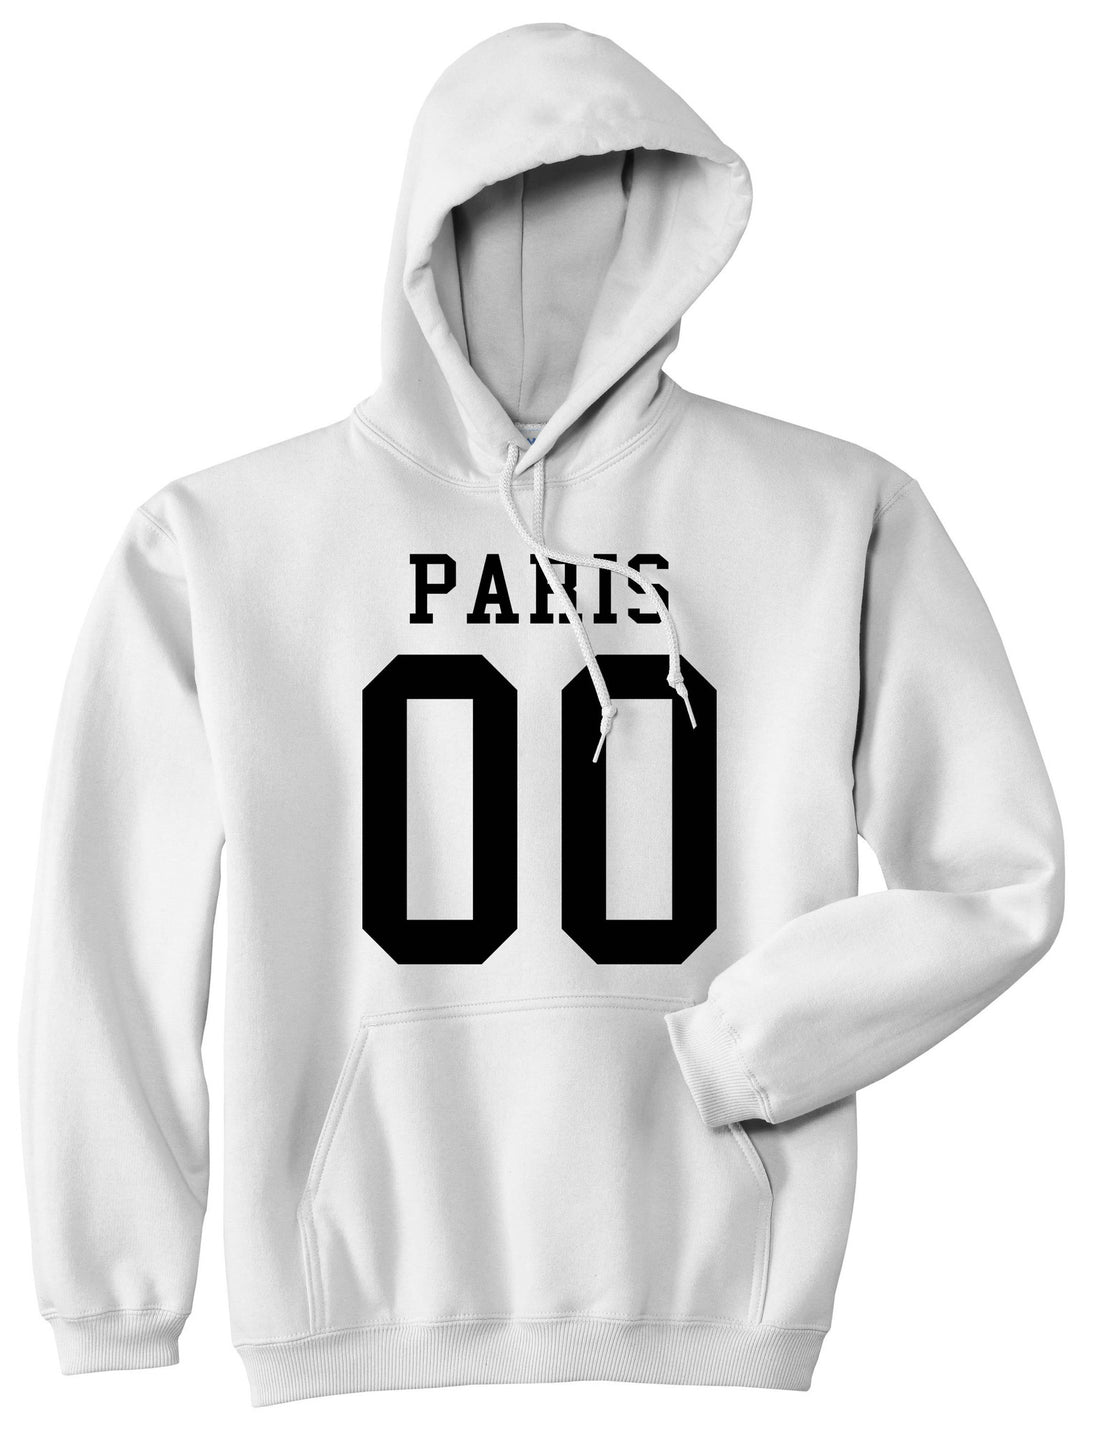 Paris Team 00 Jersey Pullover Hoodie in White By Kings Of NY